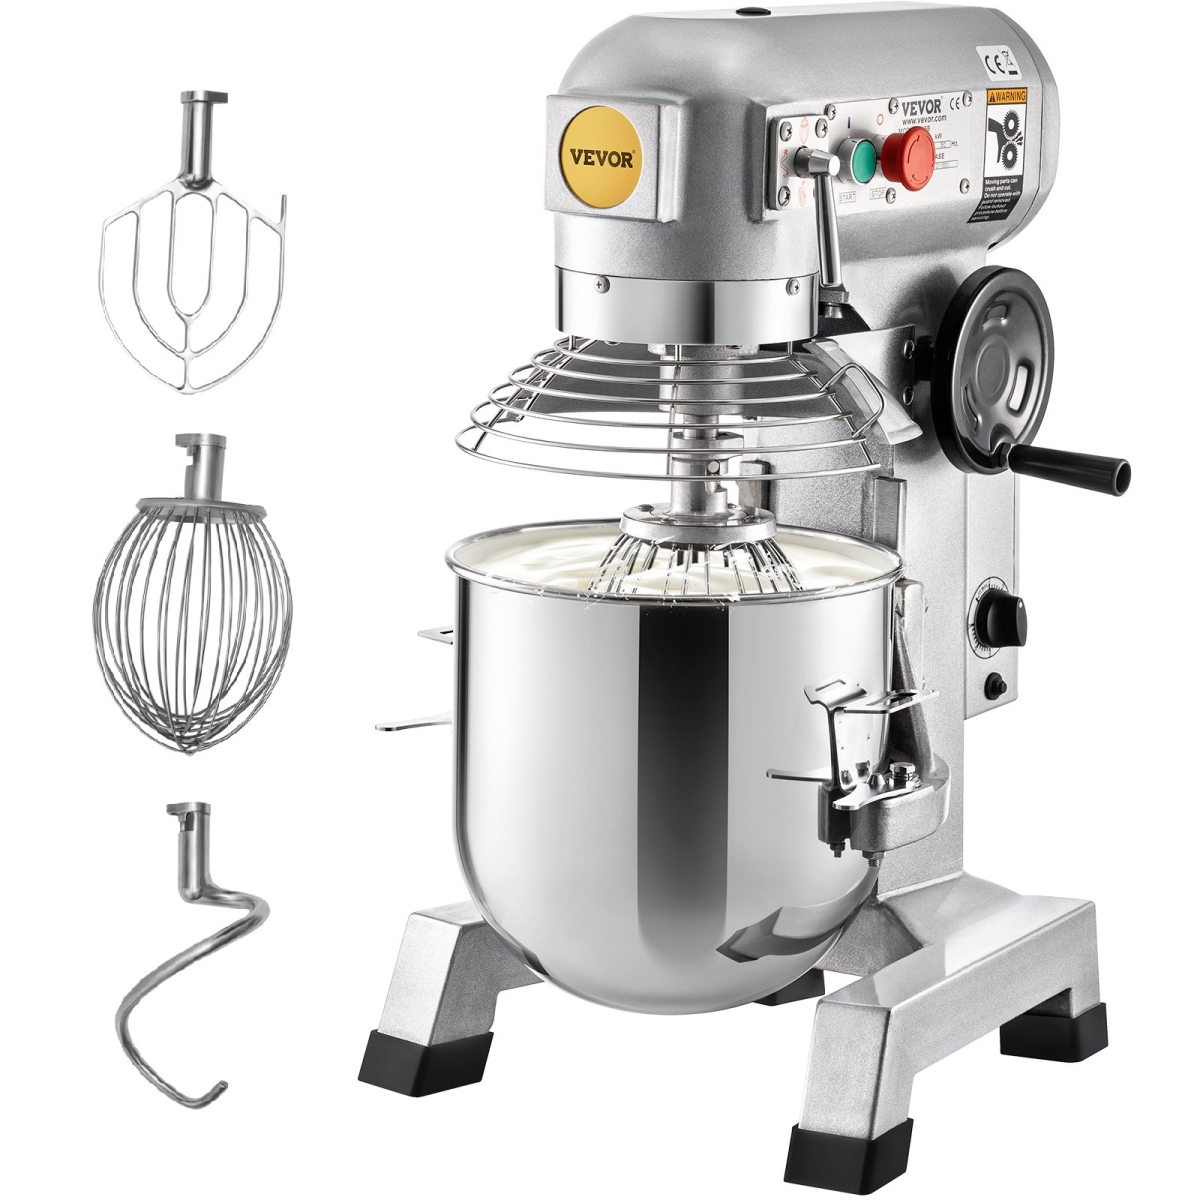 Picture of Vevor DDSYJ20QT110VE0QGV1 20 qt. Commercial Food Mixer with Timing Function with 750 watt Stainless Steel Bowl